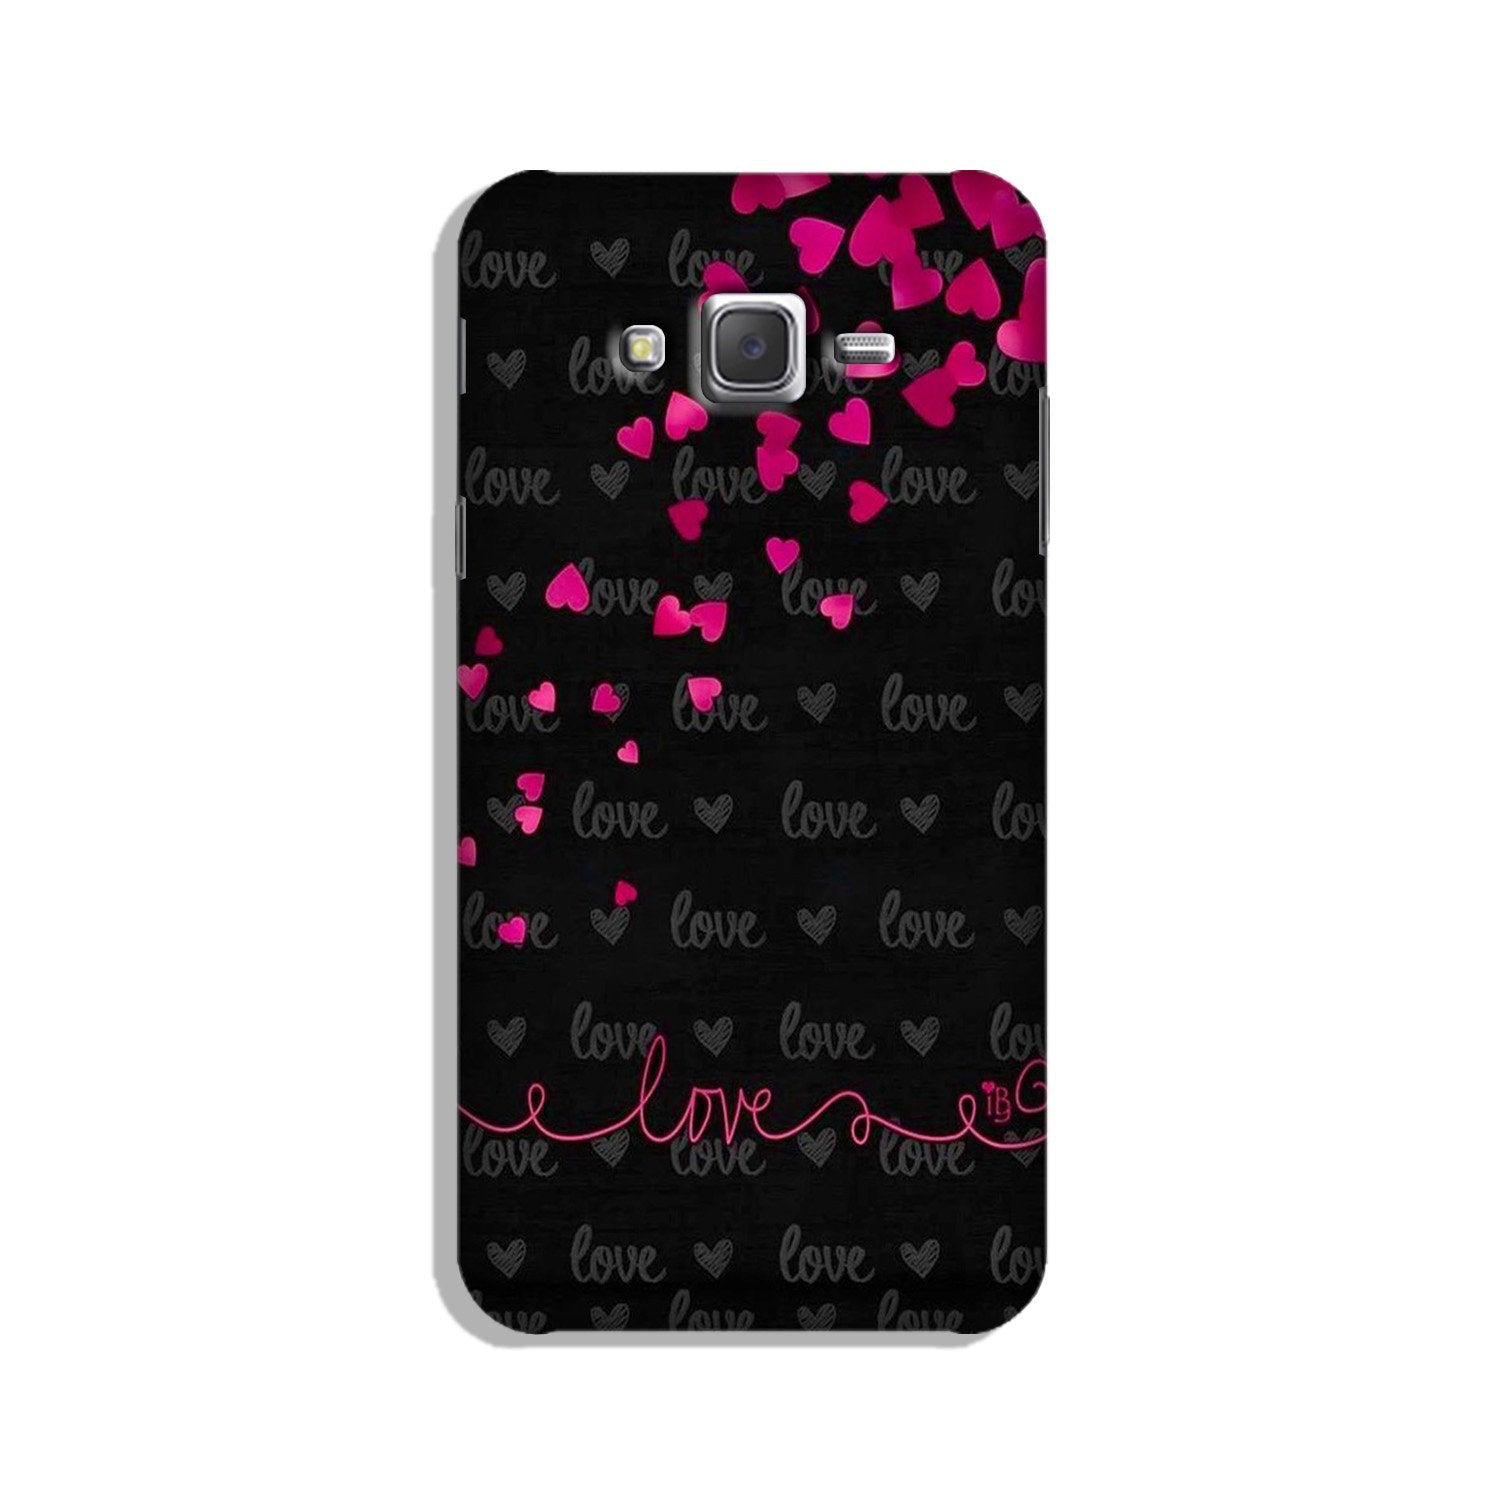 Love in Air Case for Galaxy J7 (2015)